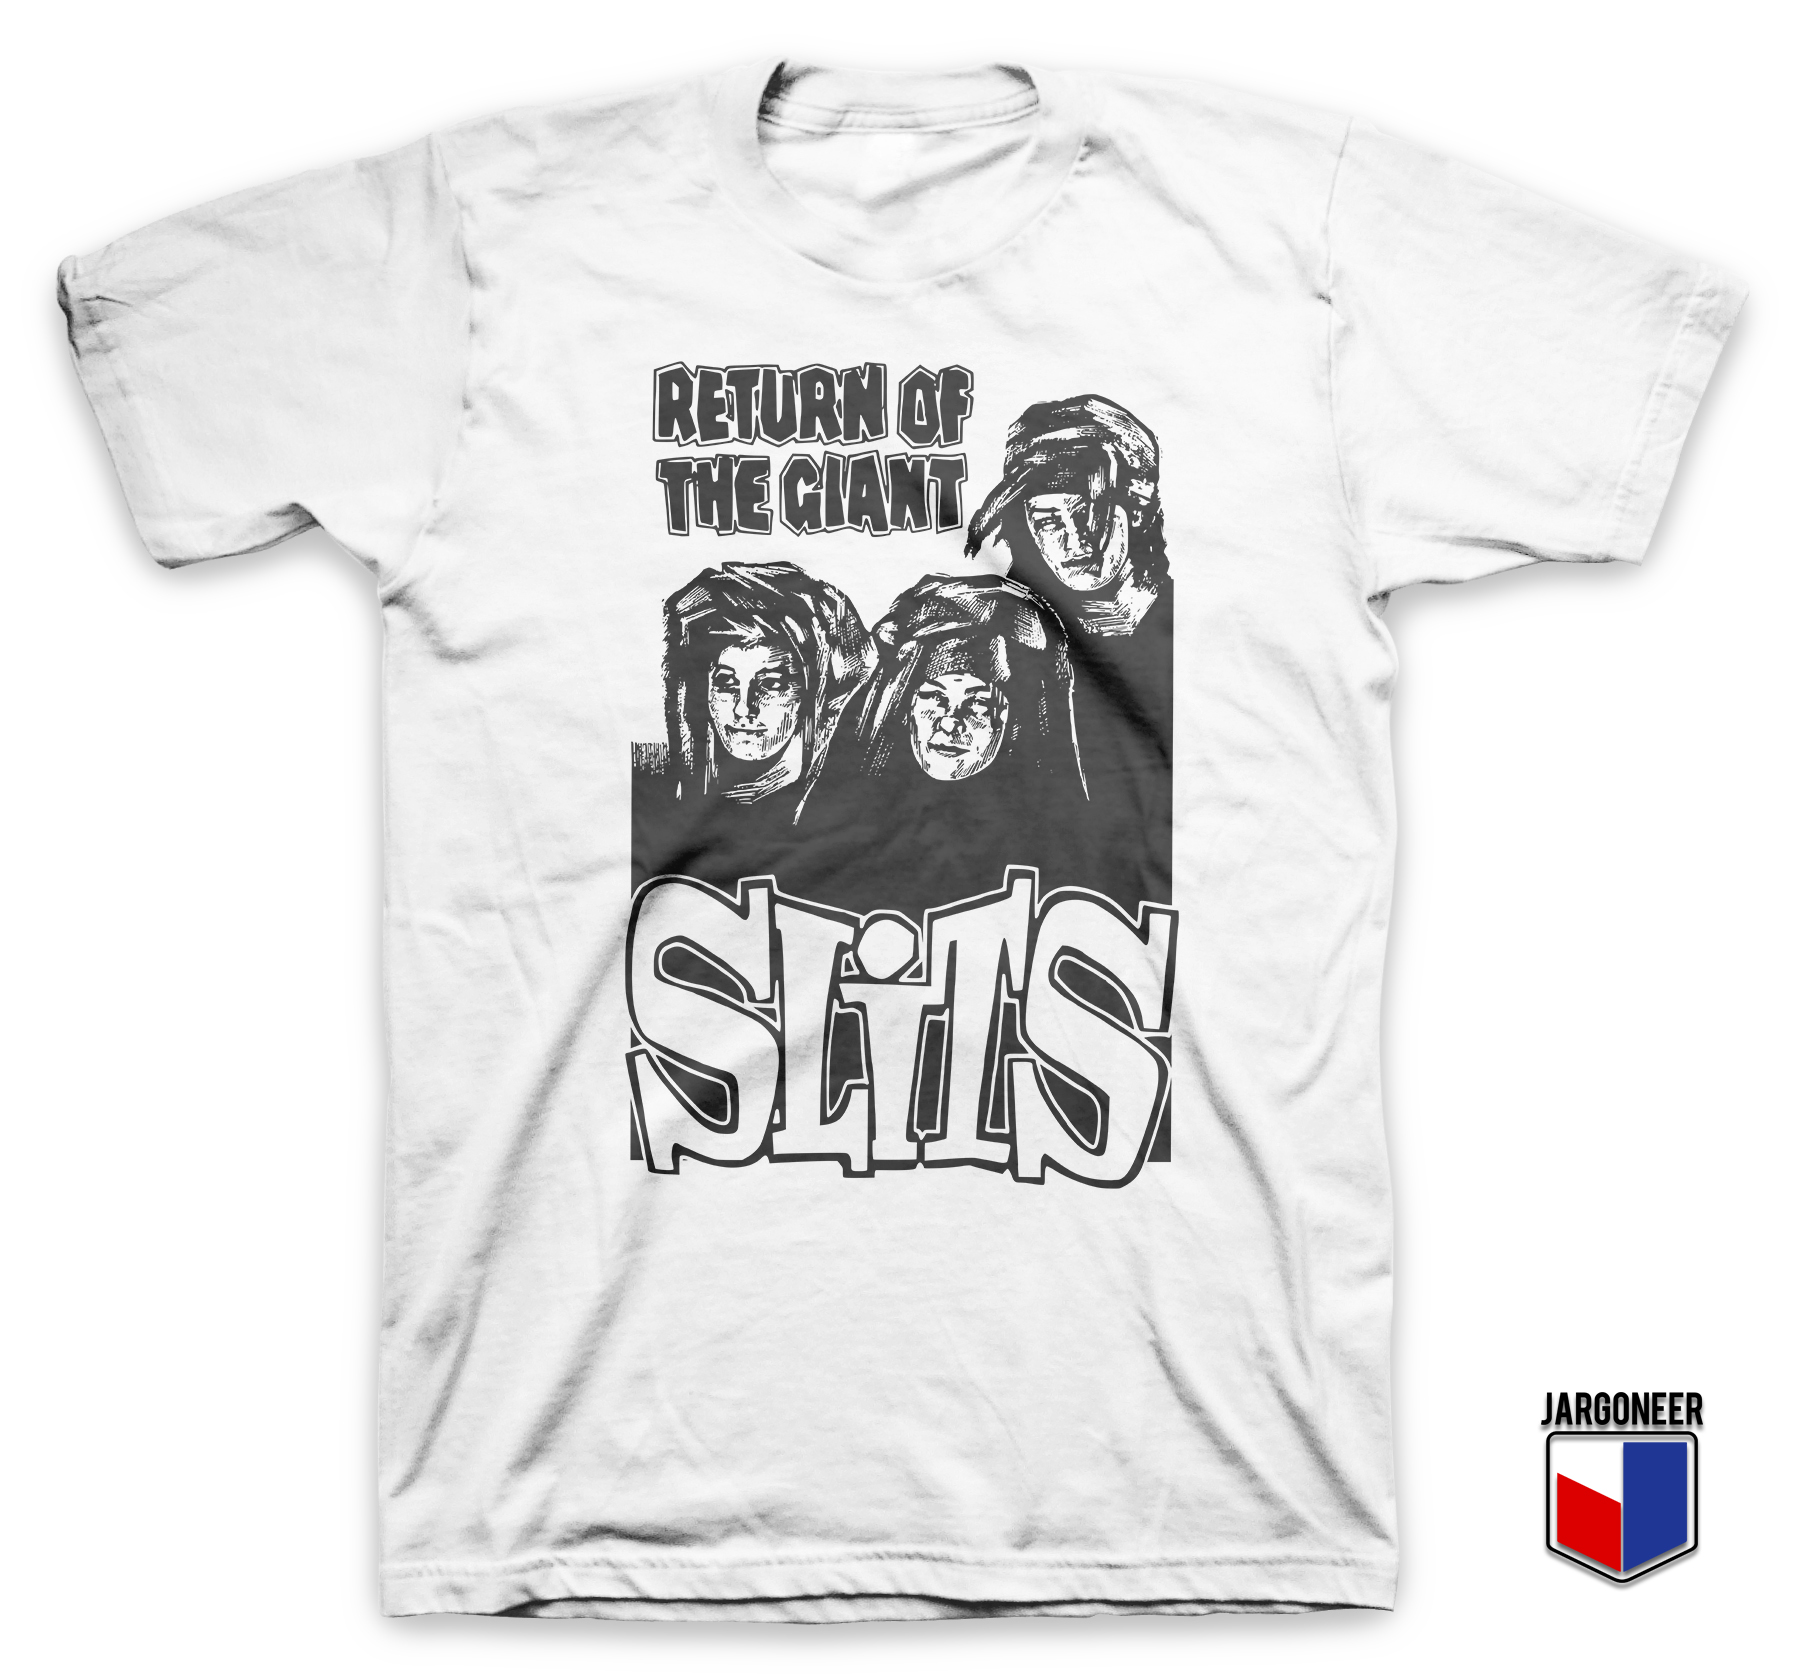 The Slits Return Of The Giant White T Shirt - Shop Unique Graphic Cool Shirt Designs